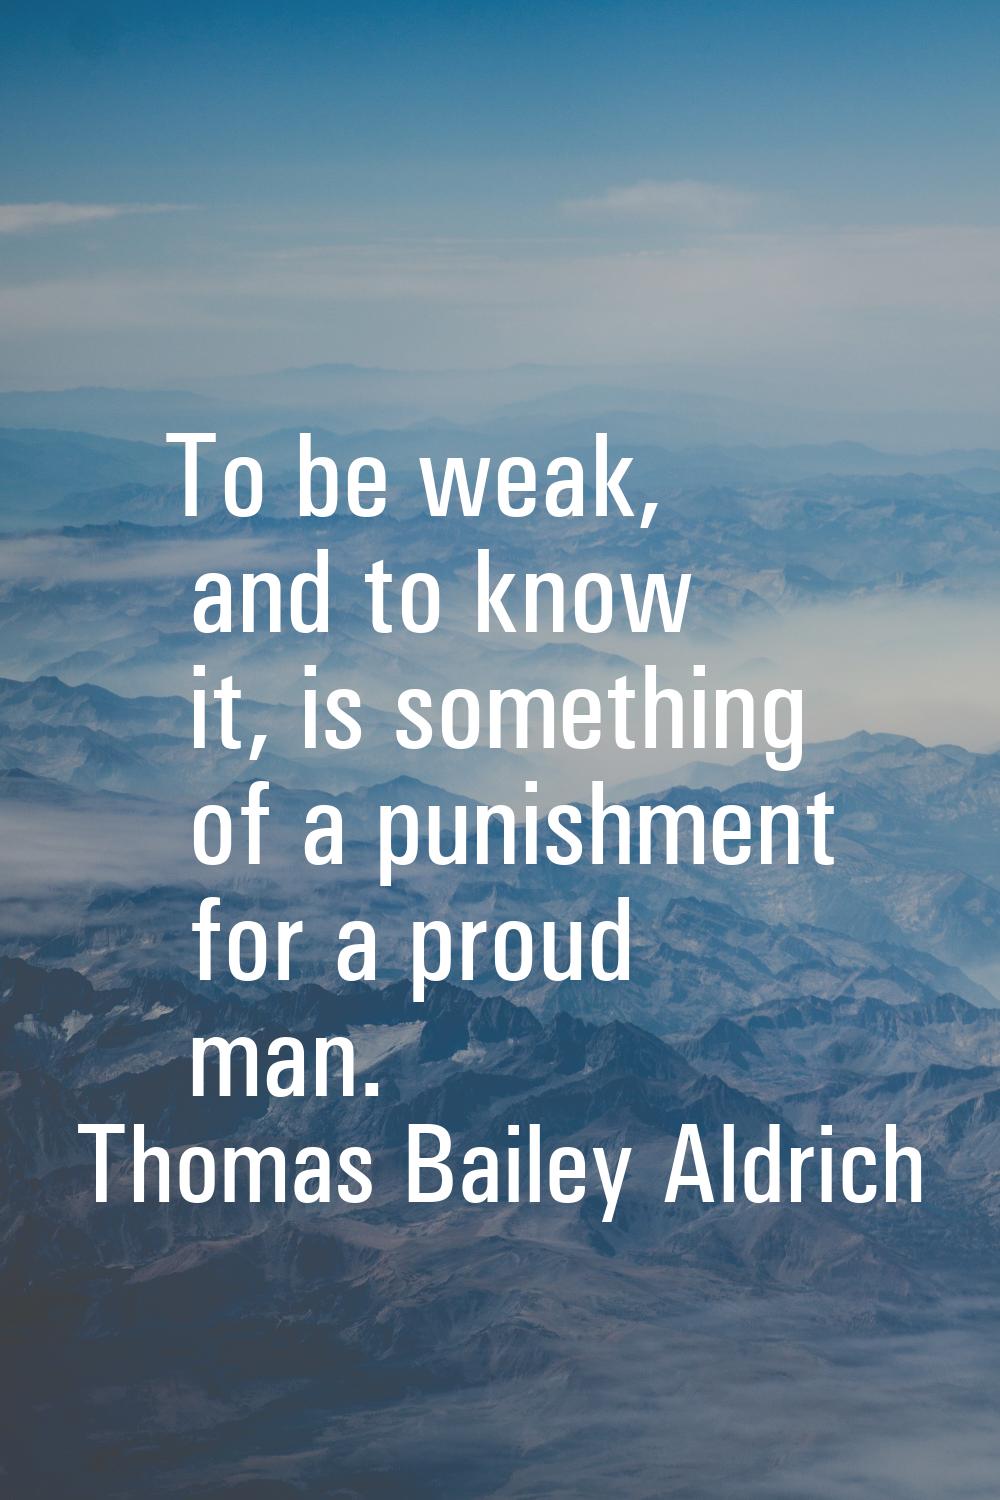 To be weak, and to know it, is something of a punishment for a proud man.